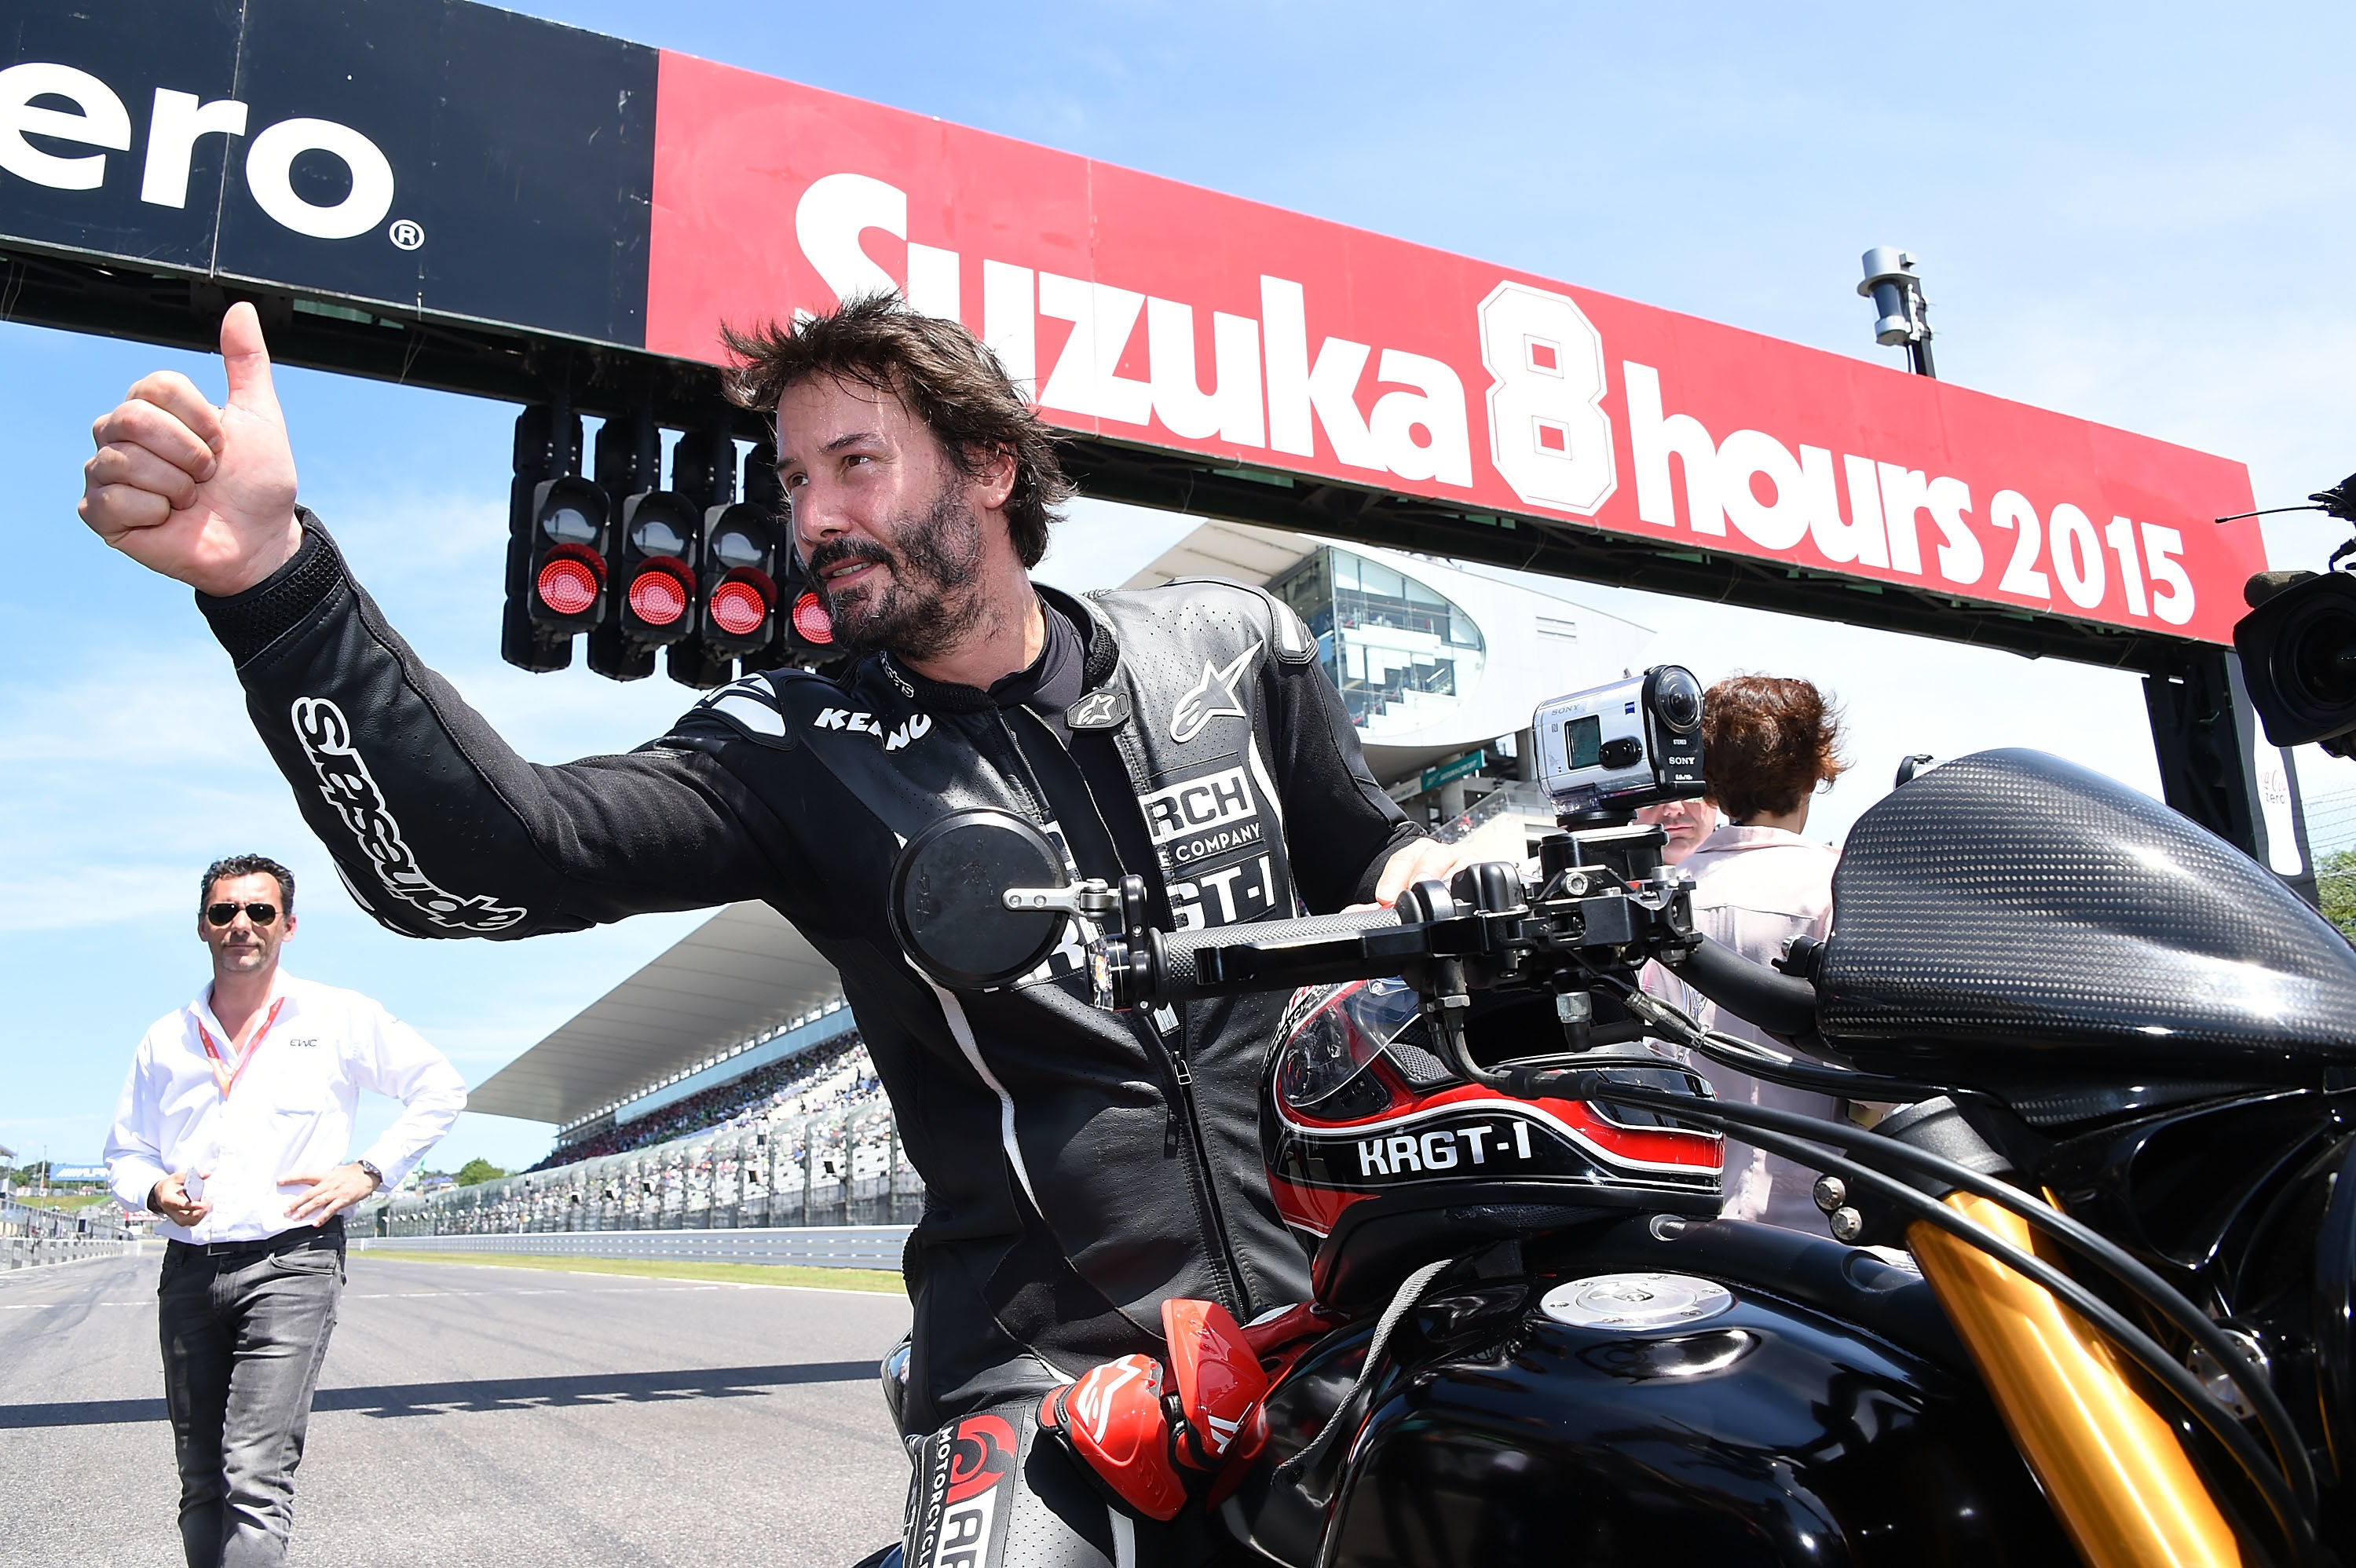 Keanu gives a thumbs up on a motocycle